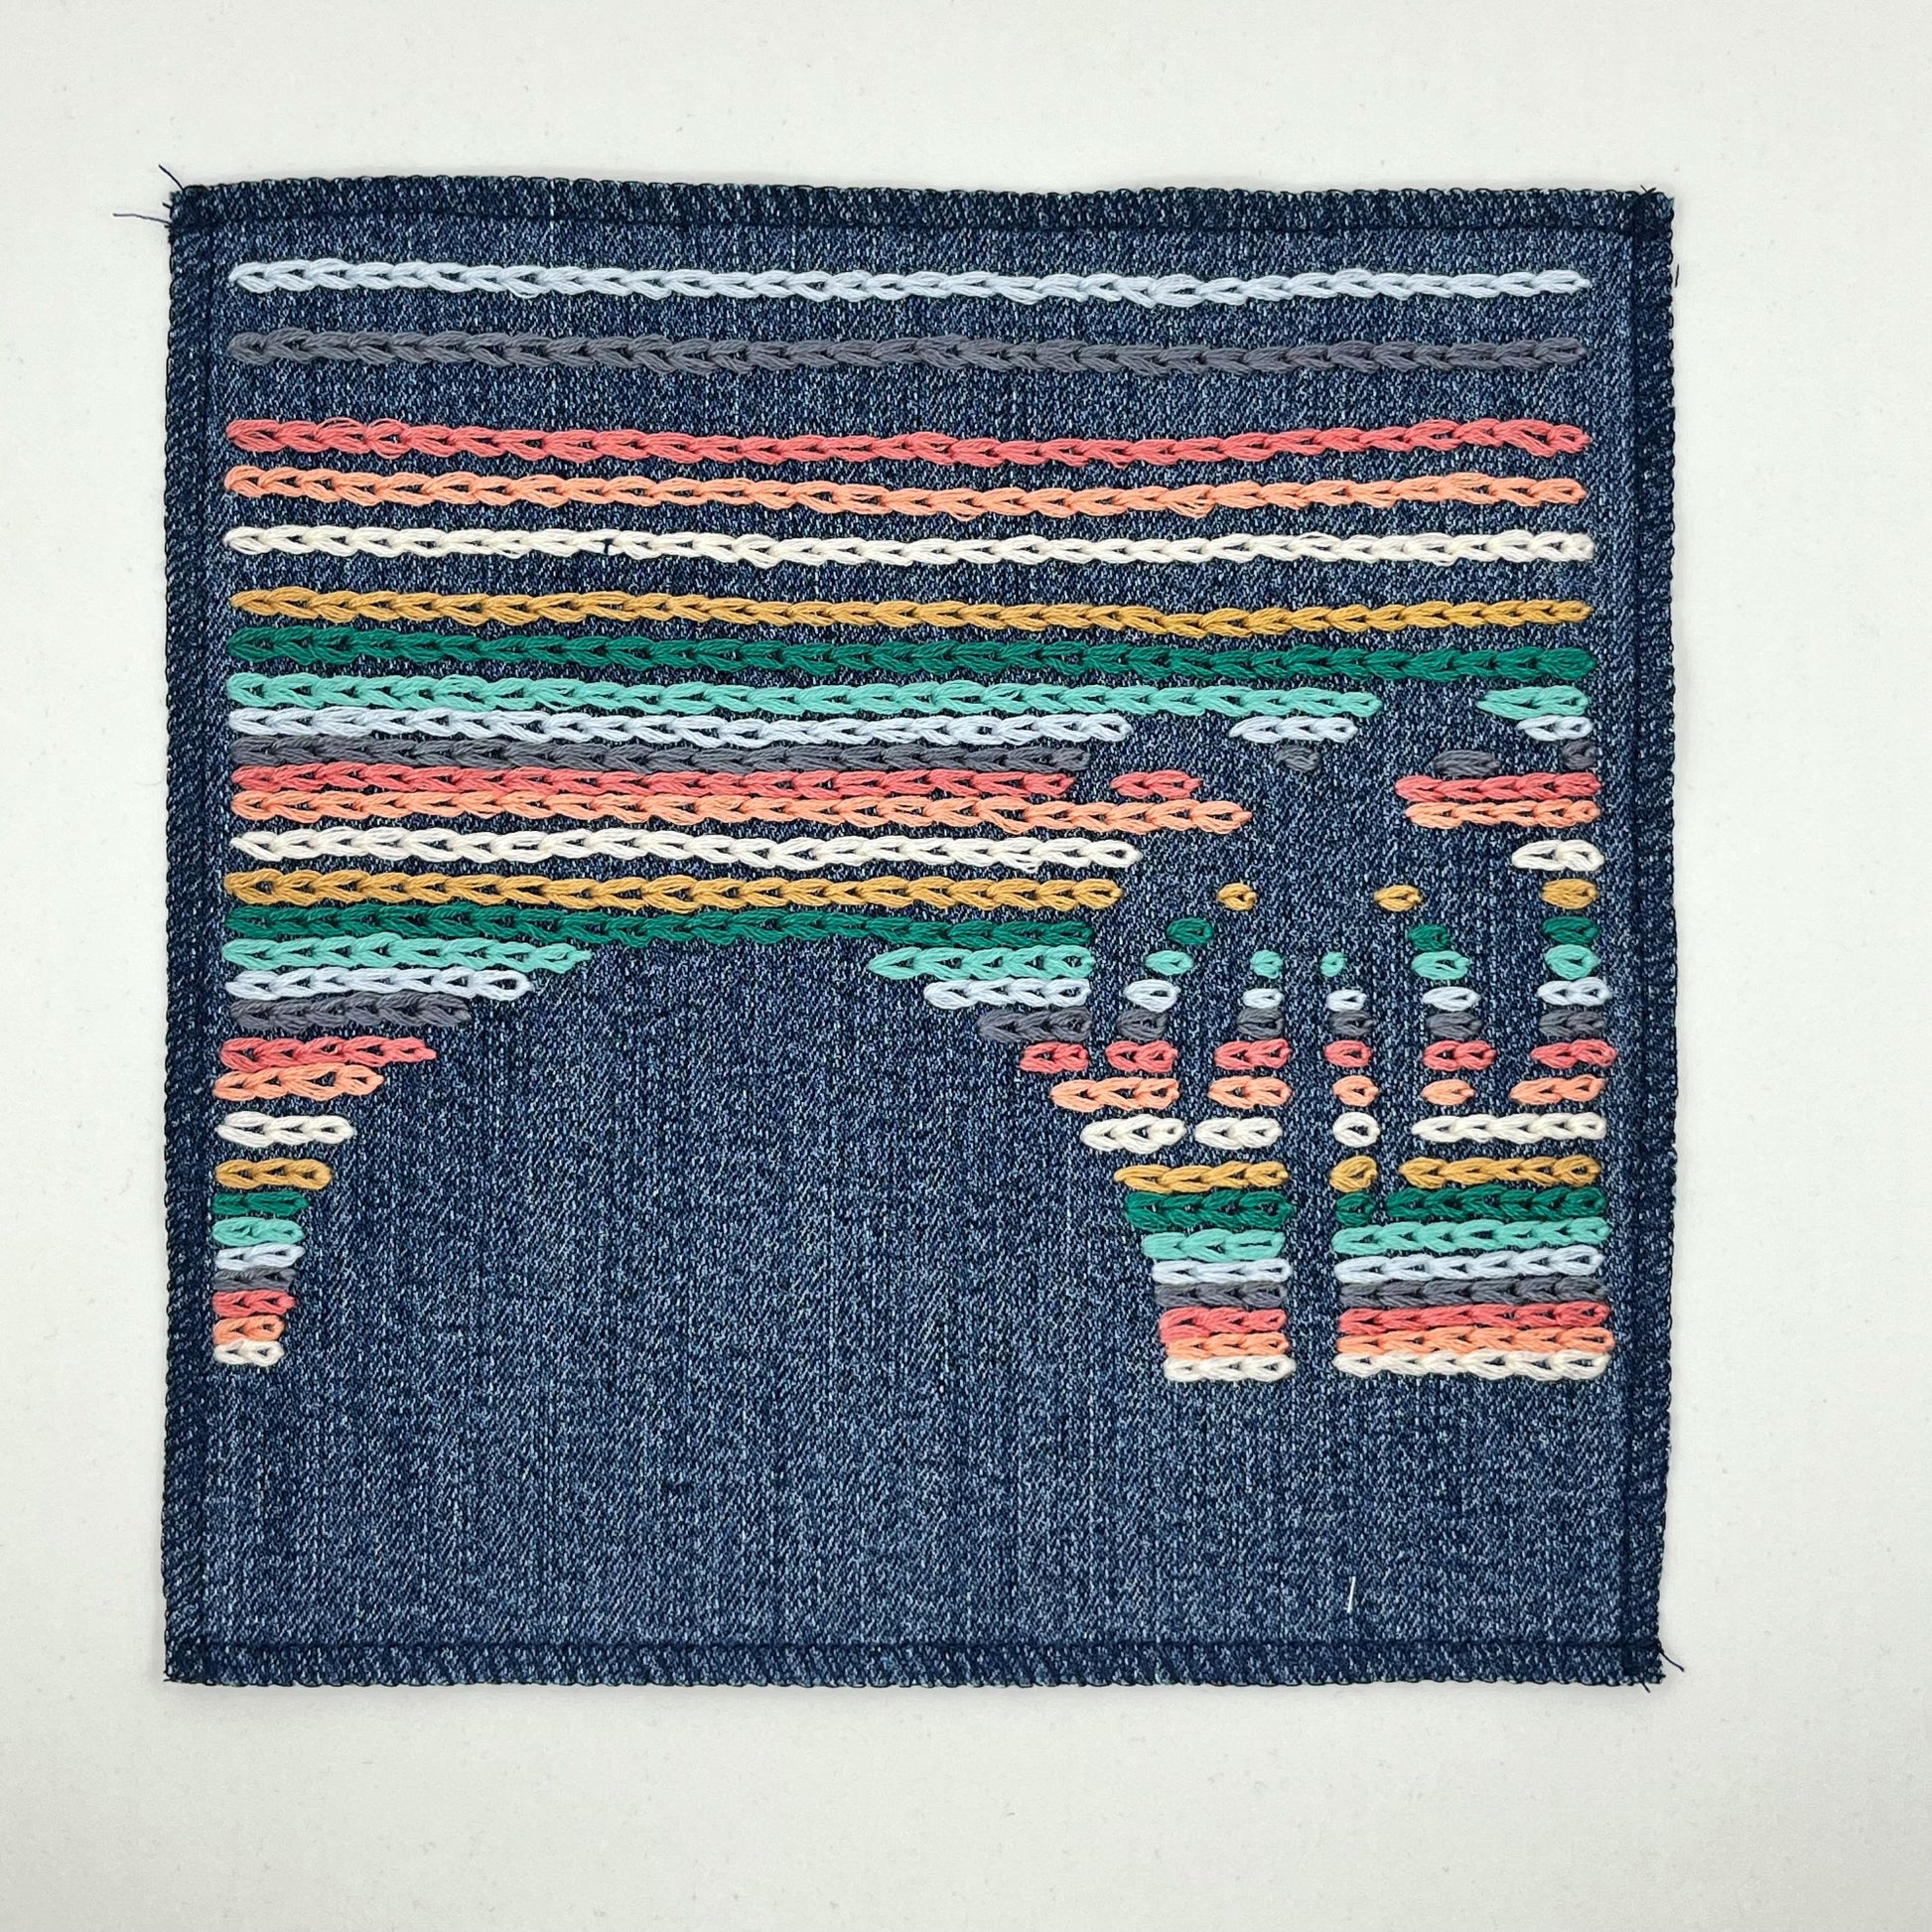 a large square denim patch, hand stitched with rows of chainstitch, with negative space showing the shapes of a palm tree next to a setting sun, with peach, coral, grey, light blue, seafoam green and mustard colored thread, on a white background